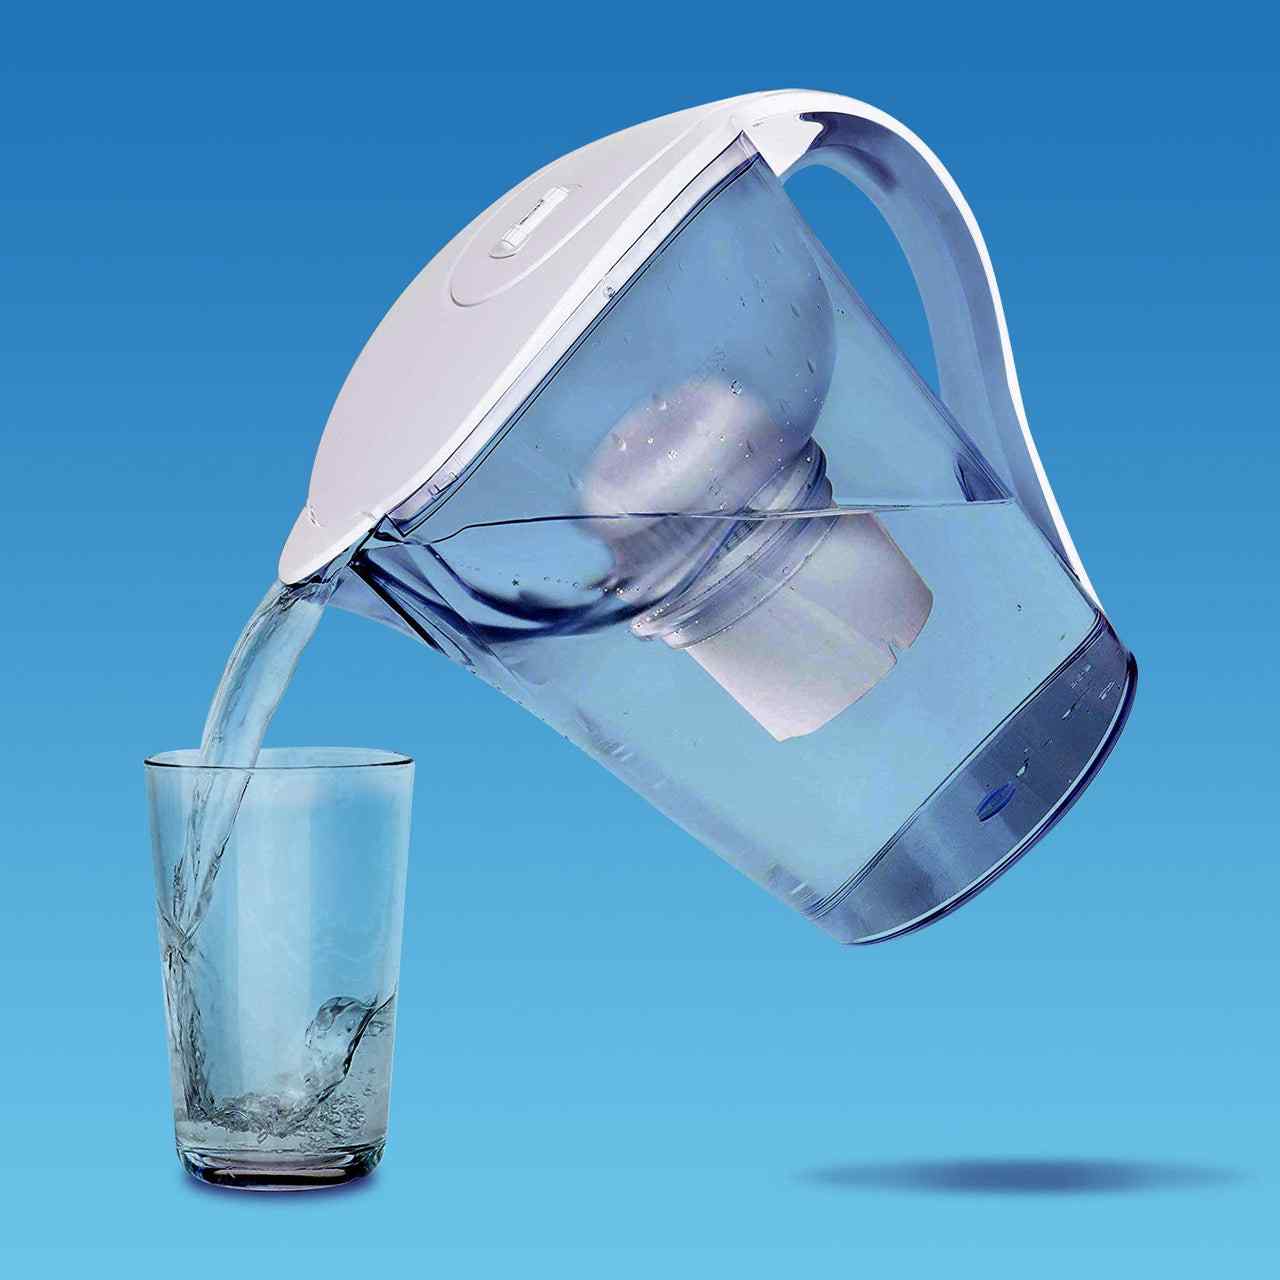 AquaBliss Longest Lasting 10-Cup Water Pitcher – Filter 2 Times More